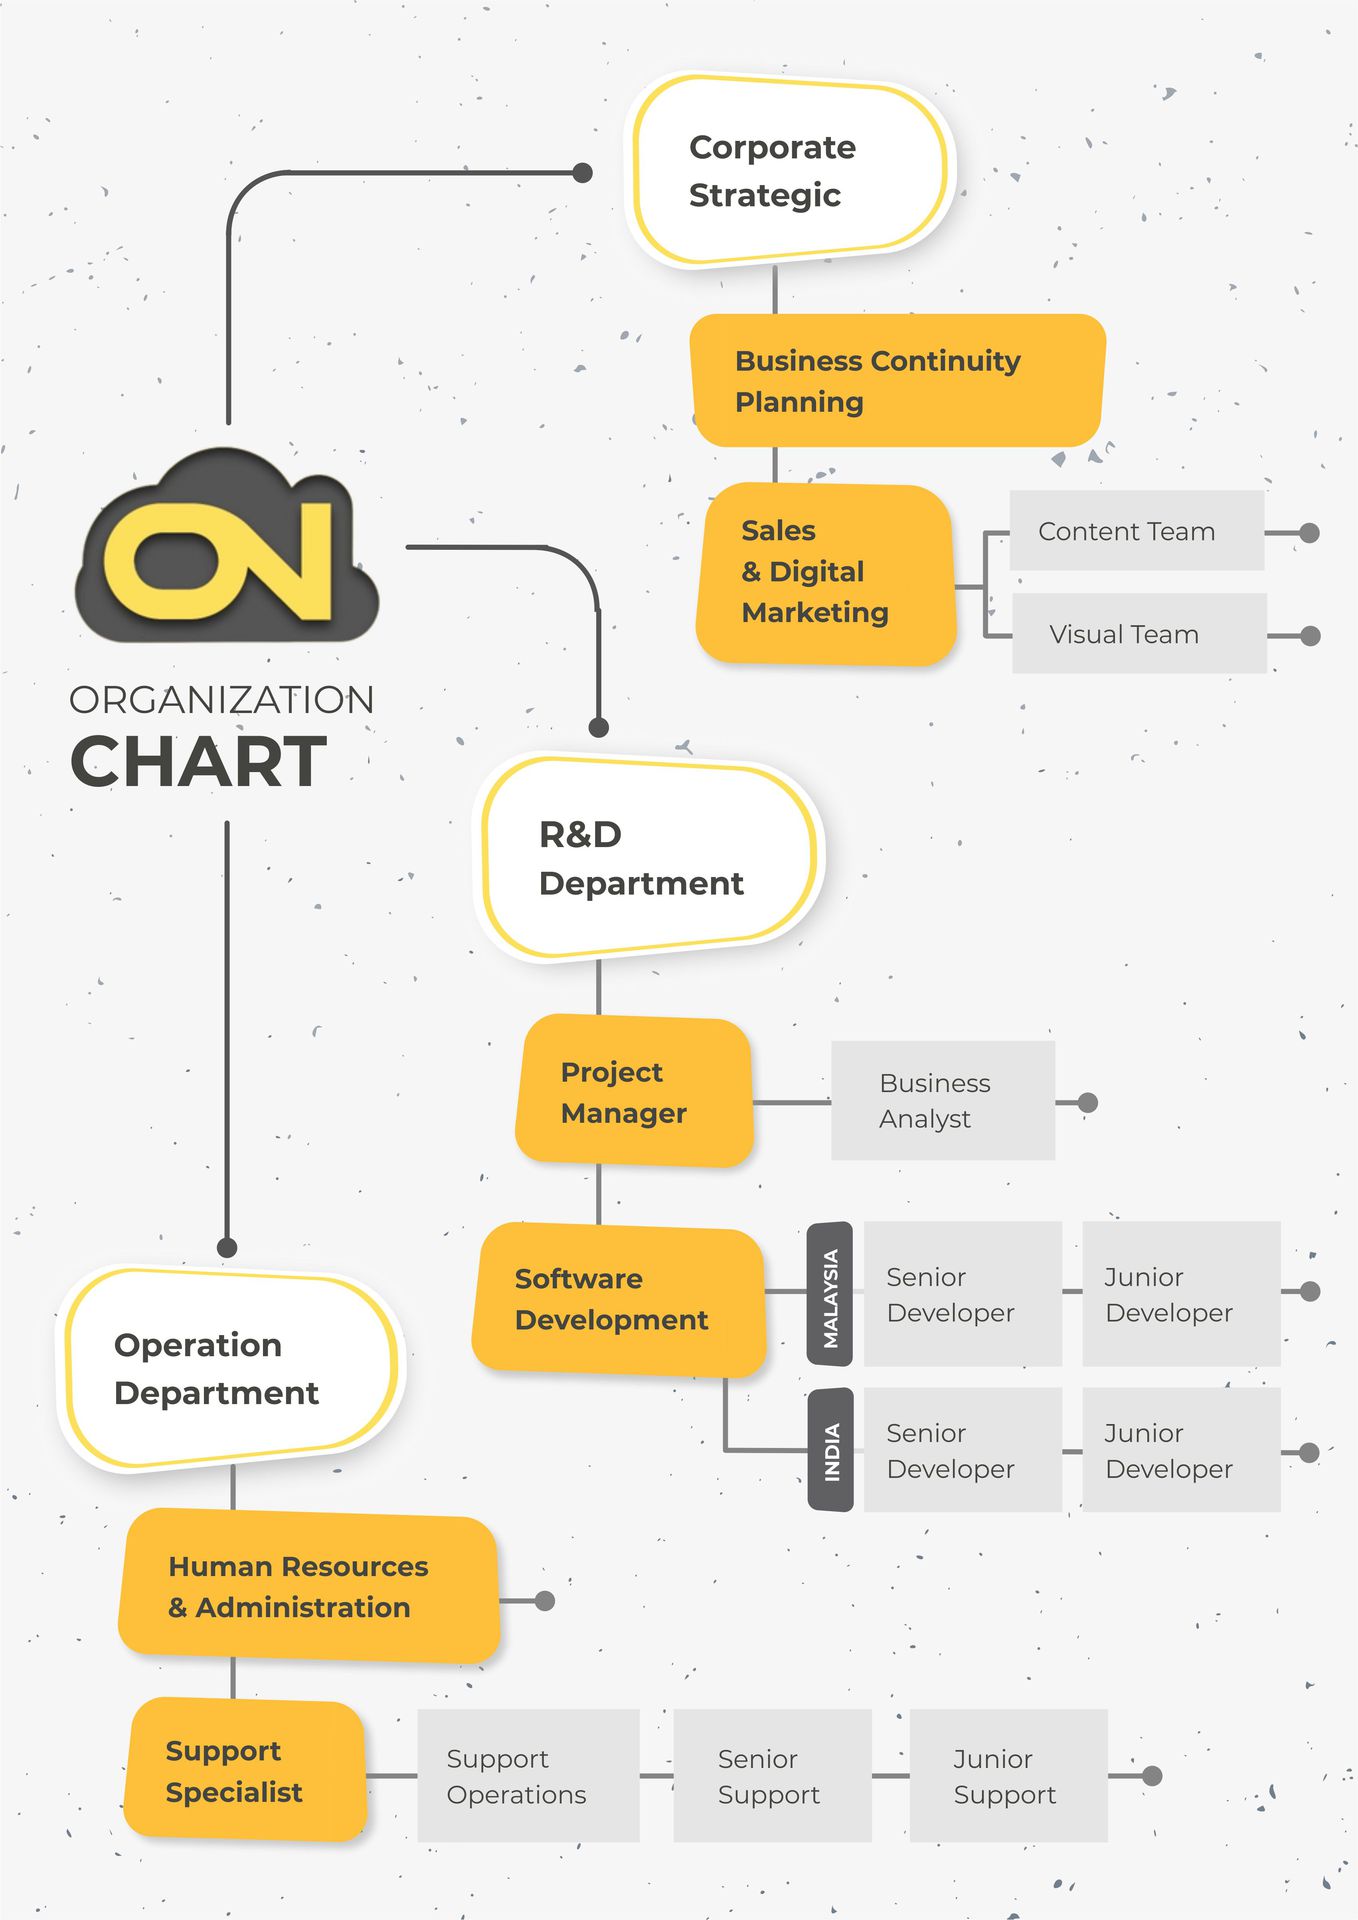 Organization Chart for Onnet, it describes their three departments.